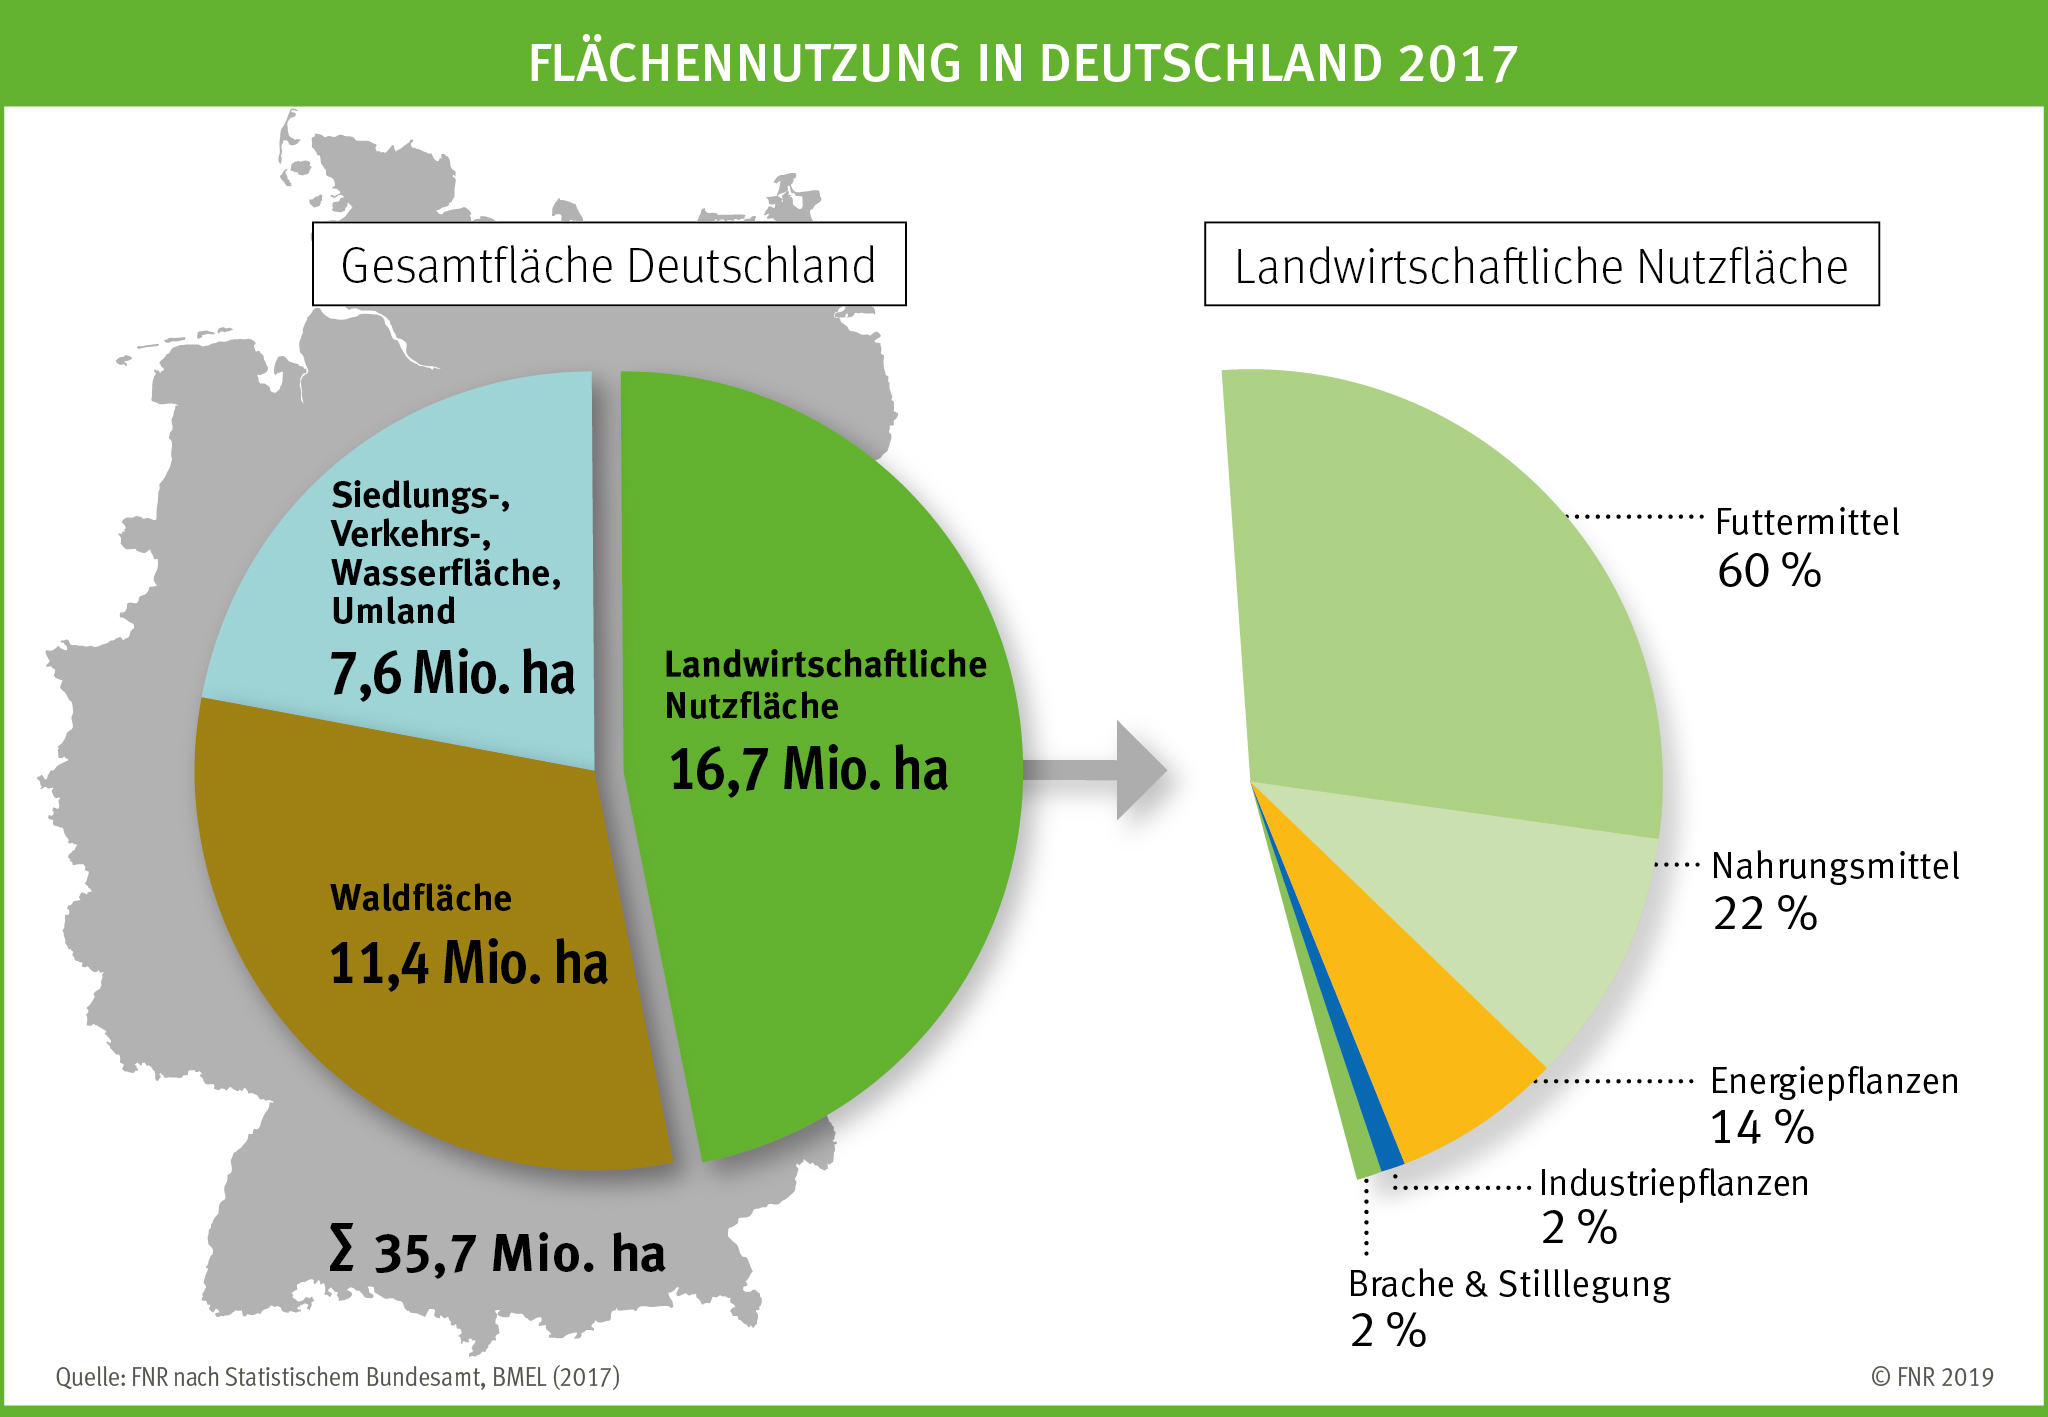 Graphic showing land use in Germany.